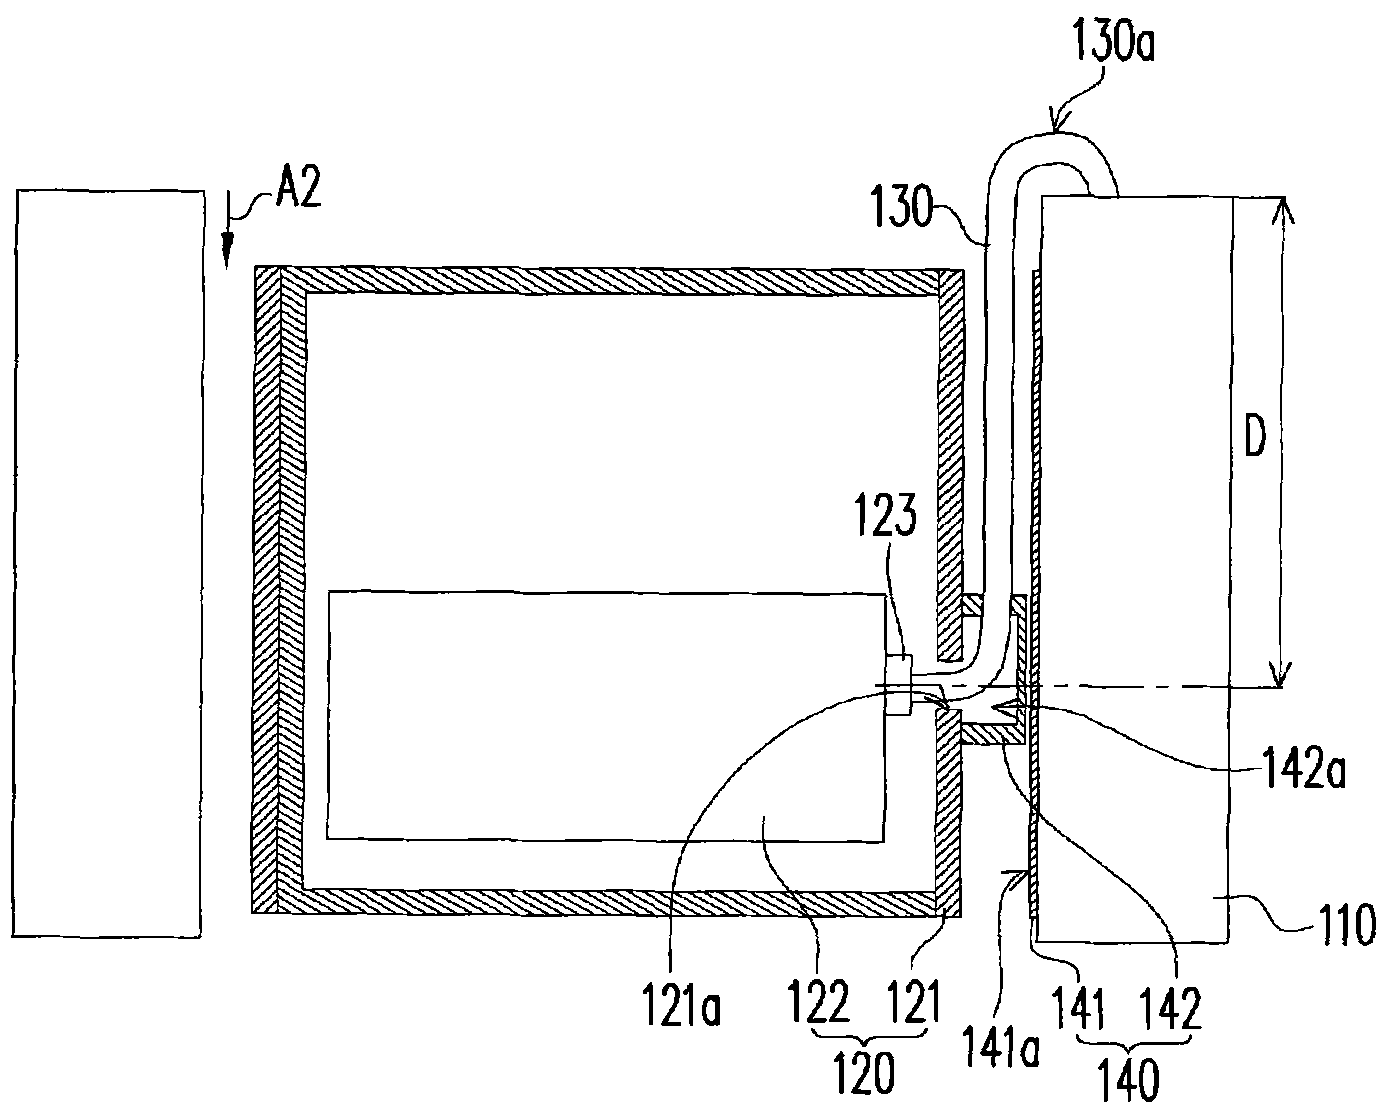 Wire rod guiding structure and rack server system